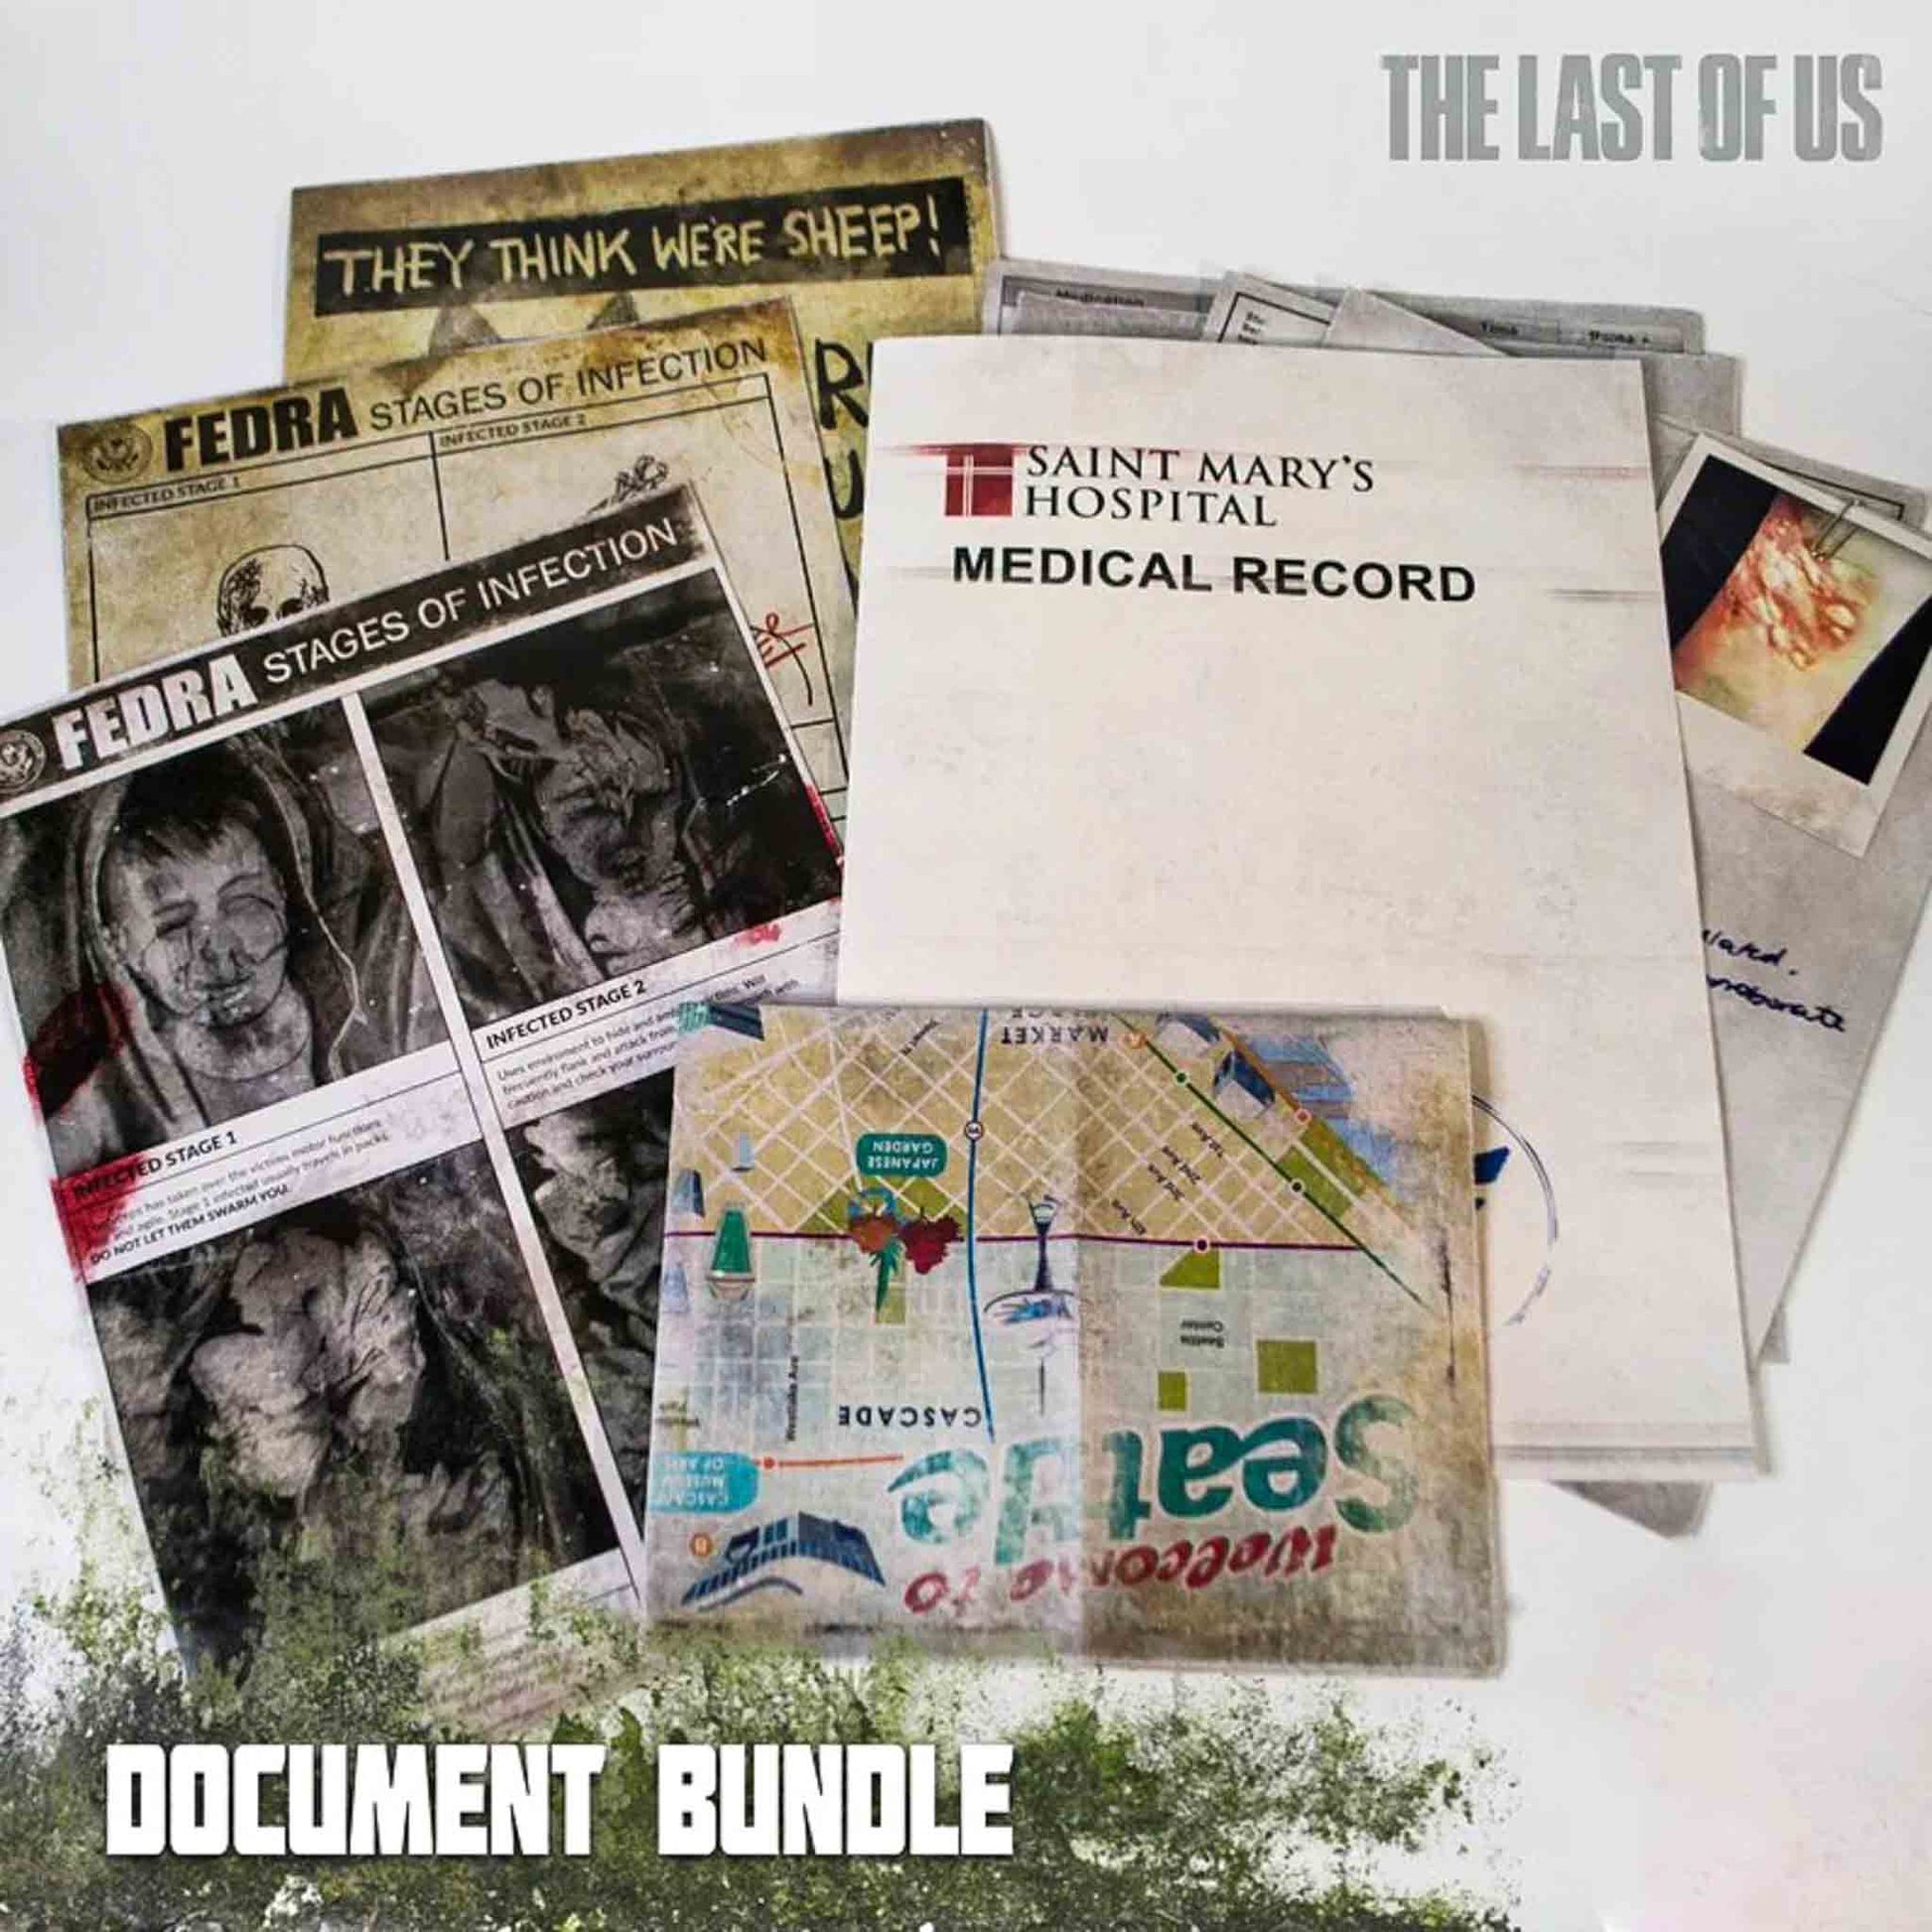 The Last of Us Part II New Fanmade Document Bundle - Ellie's Bundle Available at 2Fast2See.co